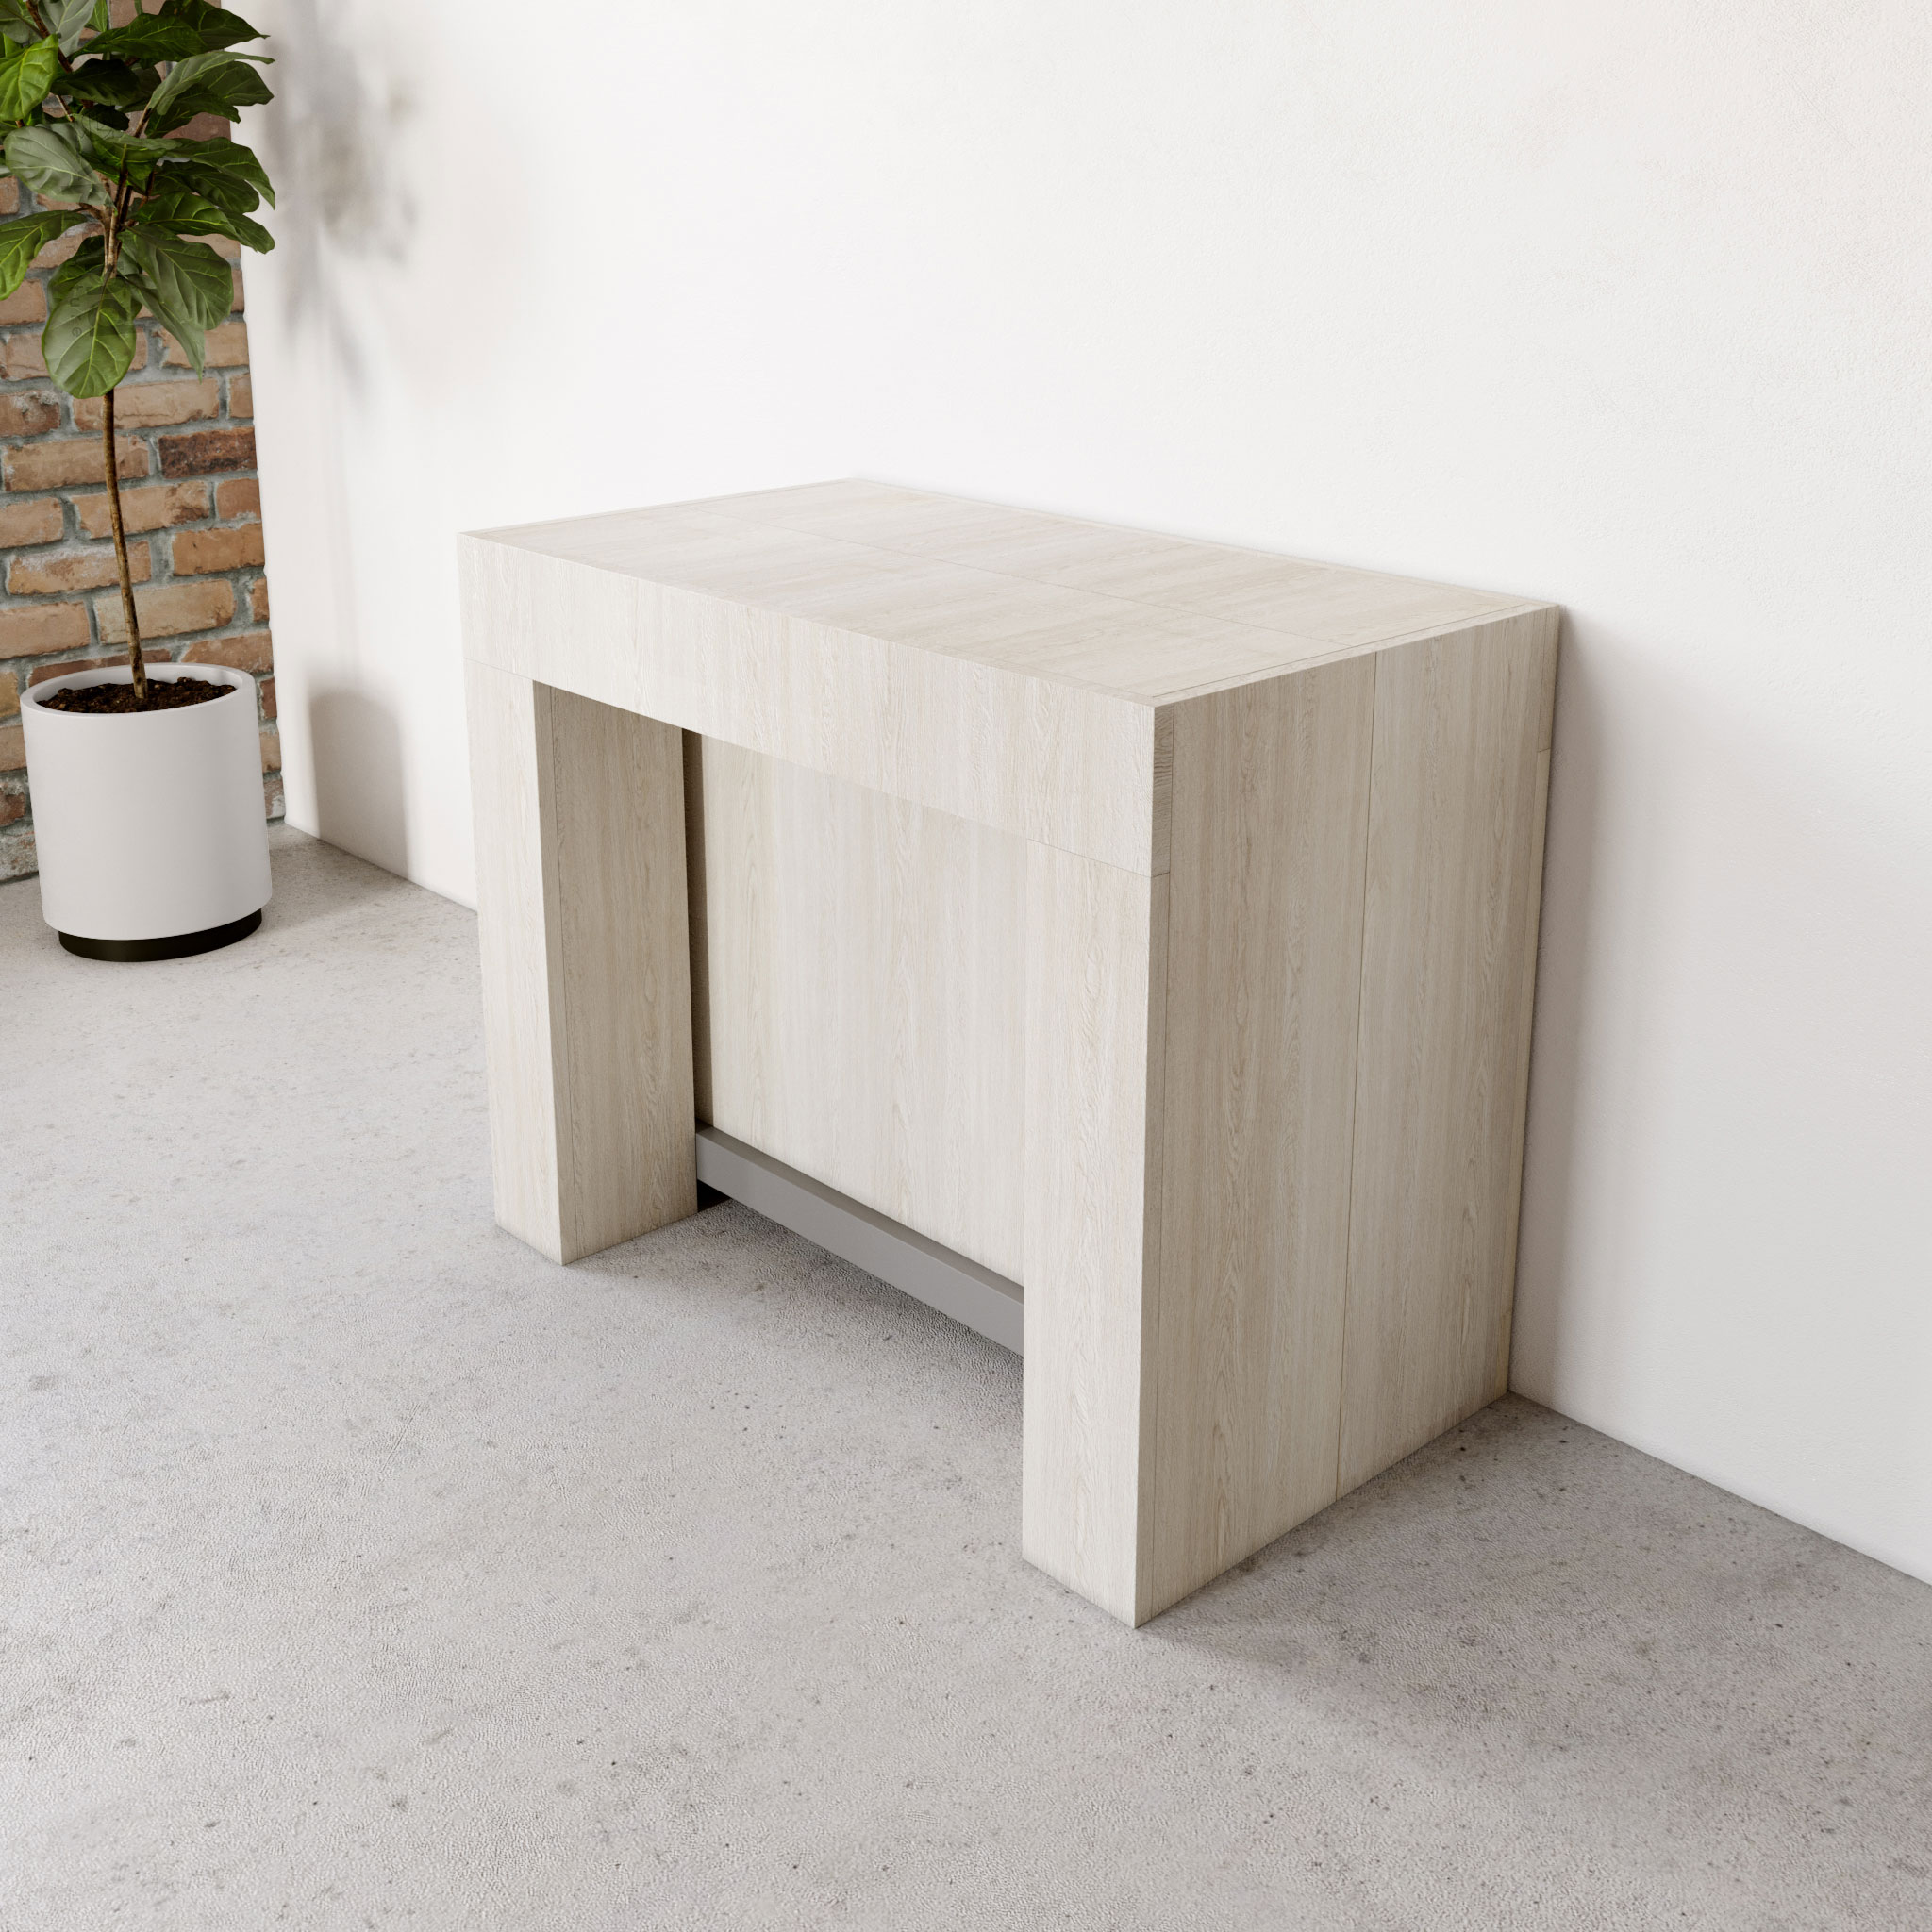 Cubist Table With Built In Extension